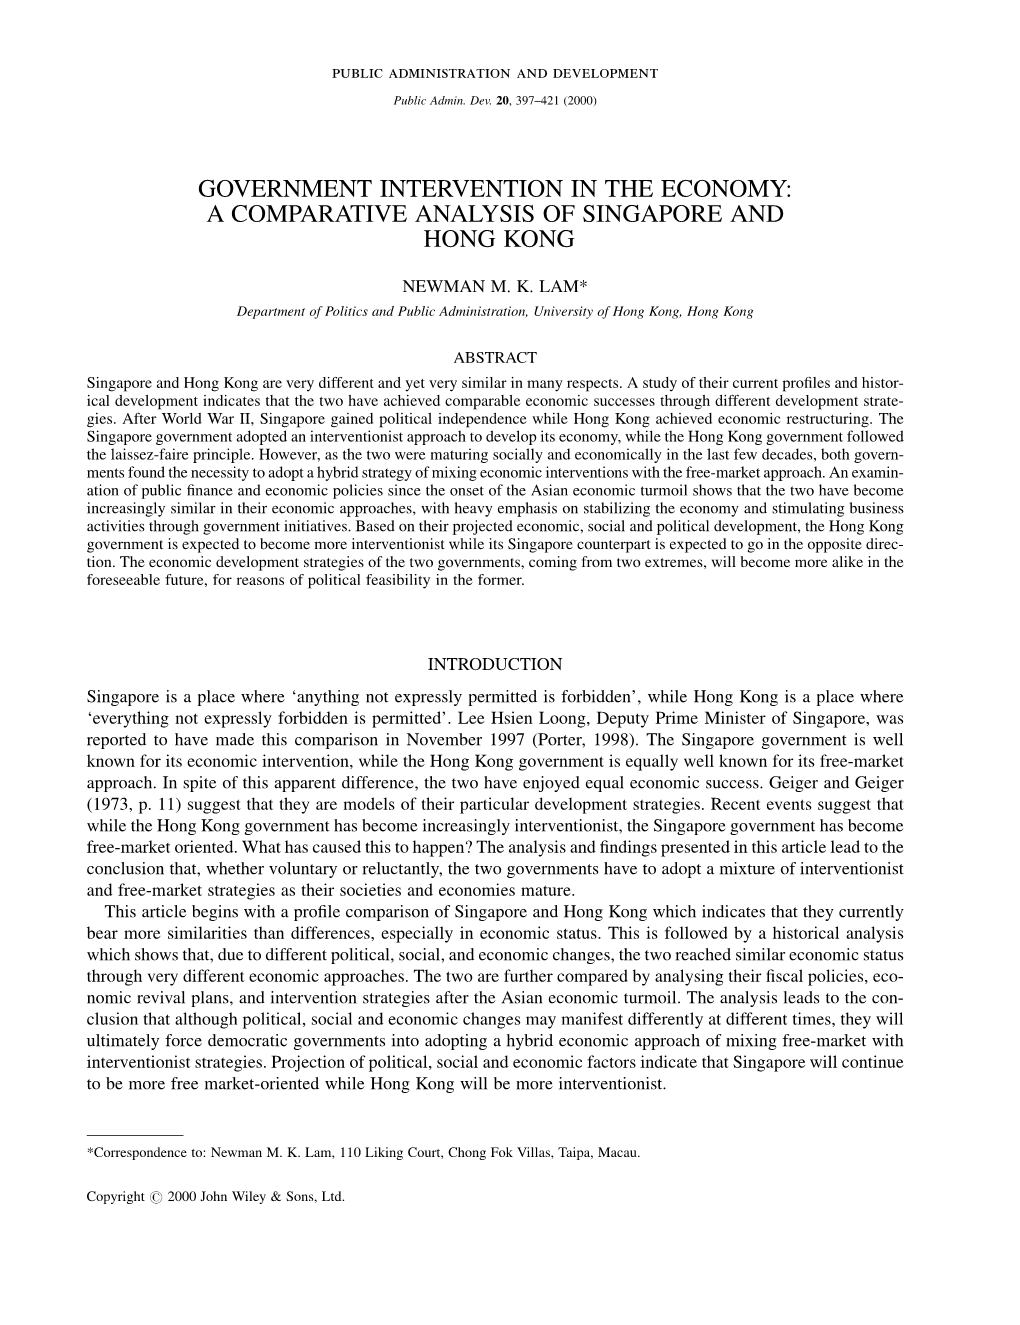 Government Intervention in the Economy: a Comparative Analysis of Singapore and Hong Kong